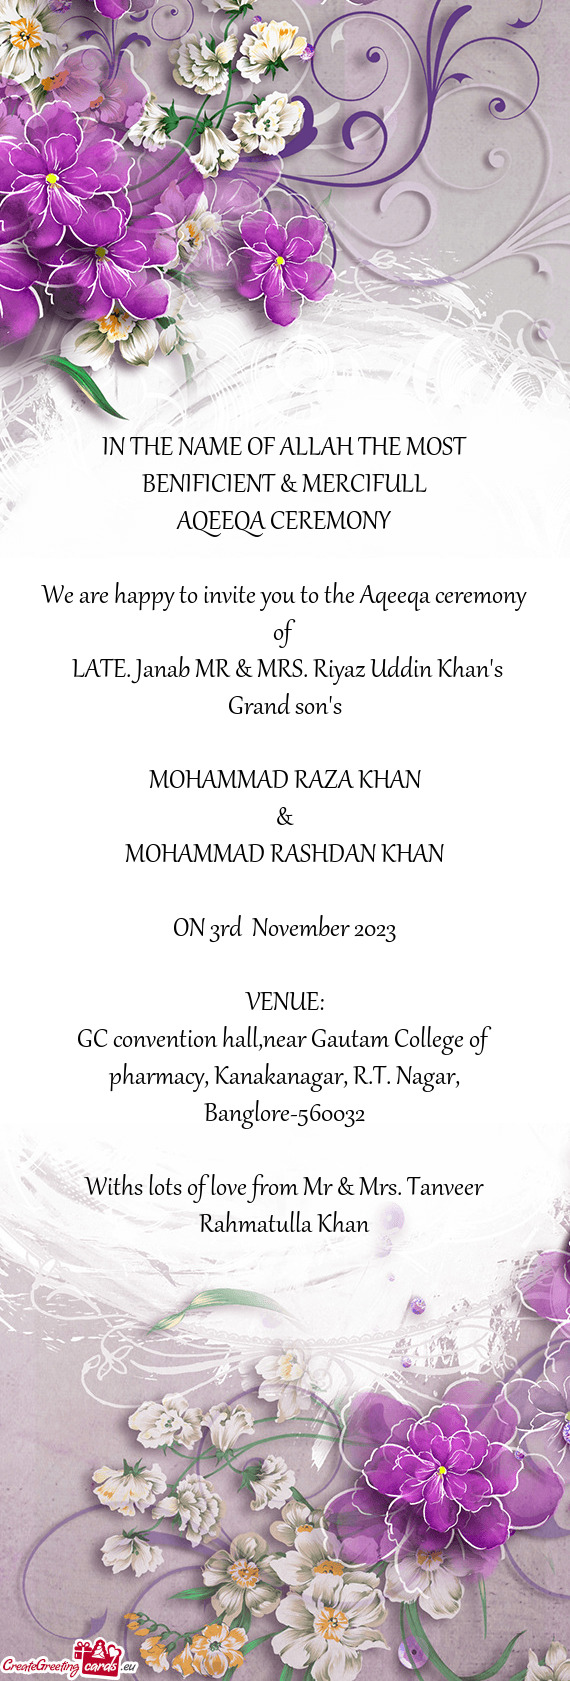 We are happy to invite you to the Aqeeqa ceremony of